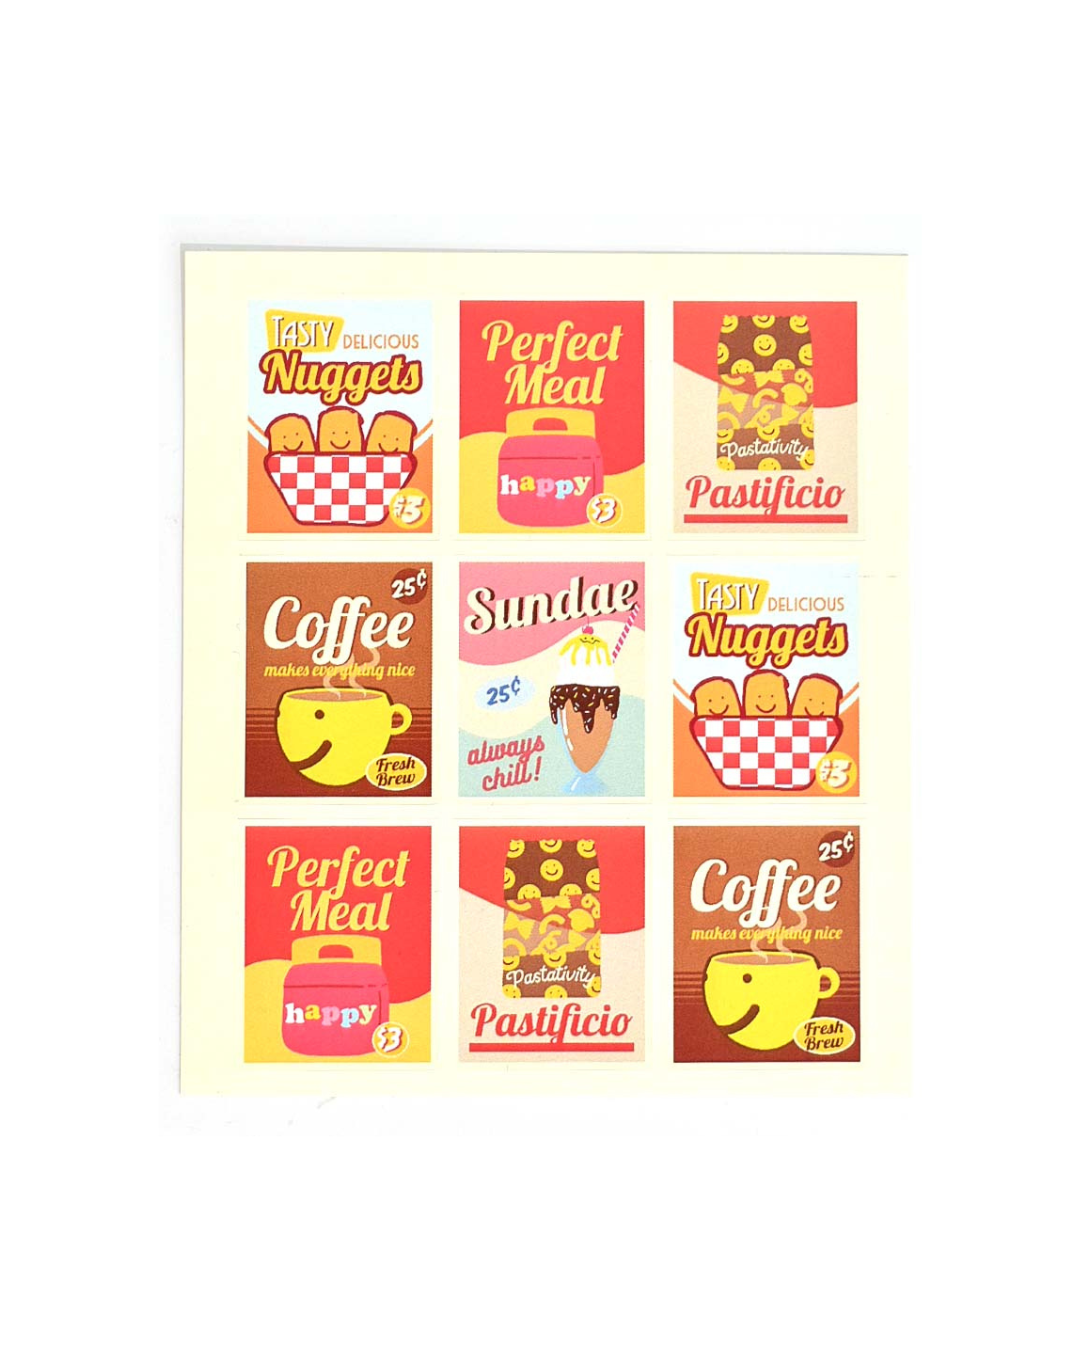 Have a Nice Day Poster Sticker Pack